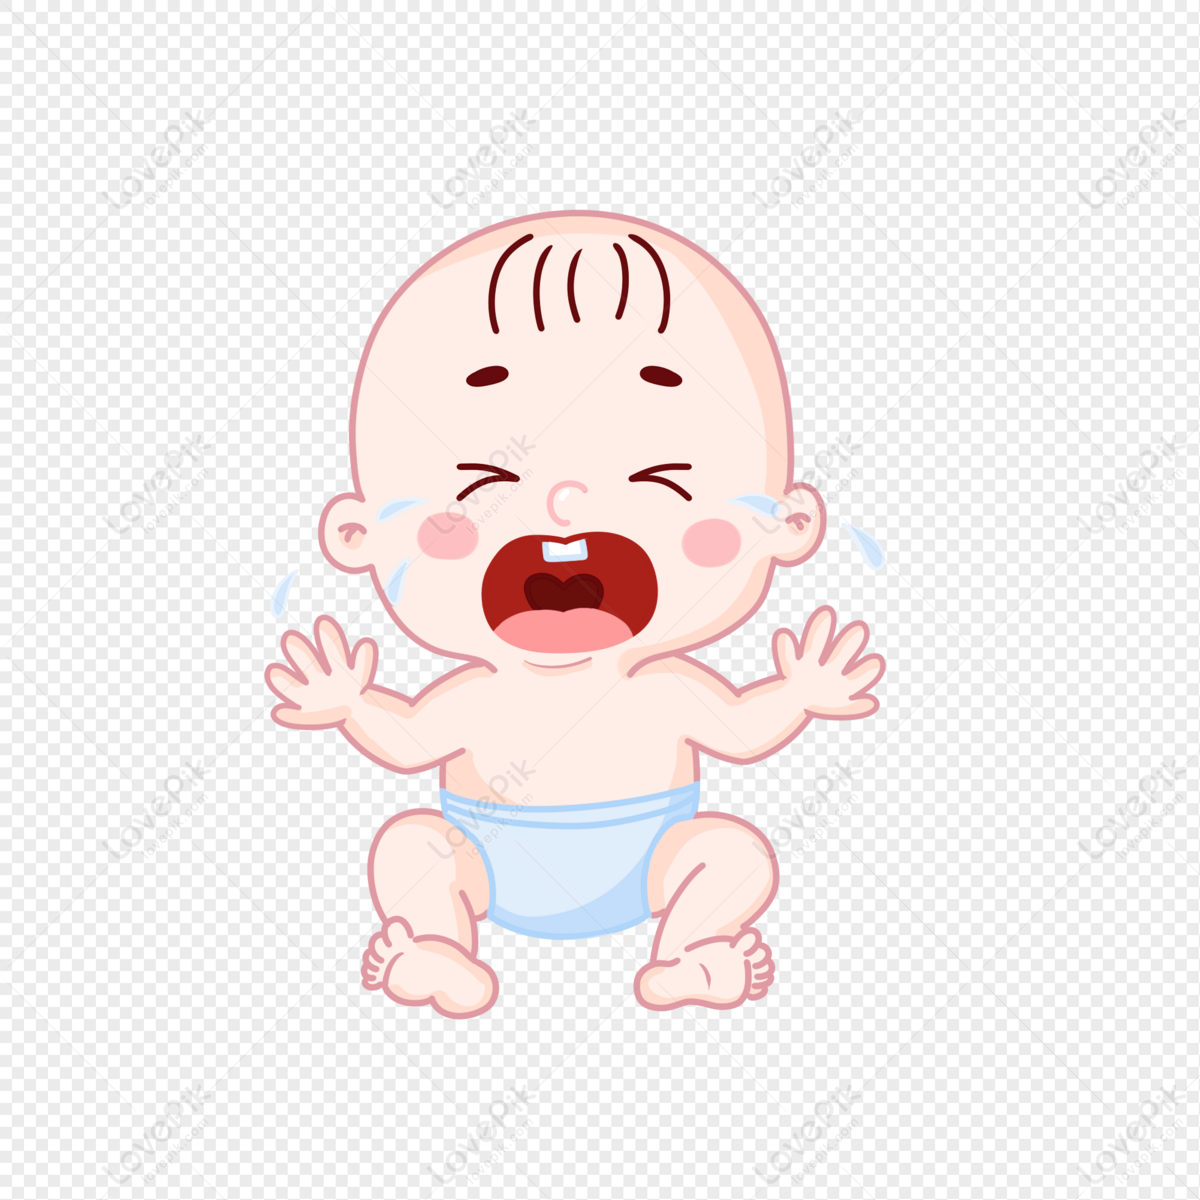 Crying Baby PNG Image And Clipart Image For Free Download - Lovepik |  401523168